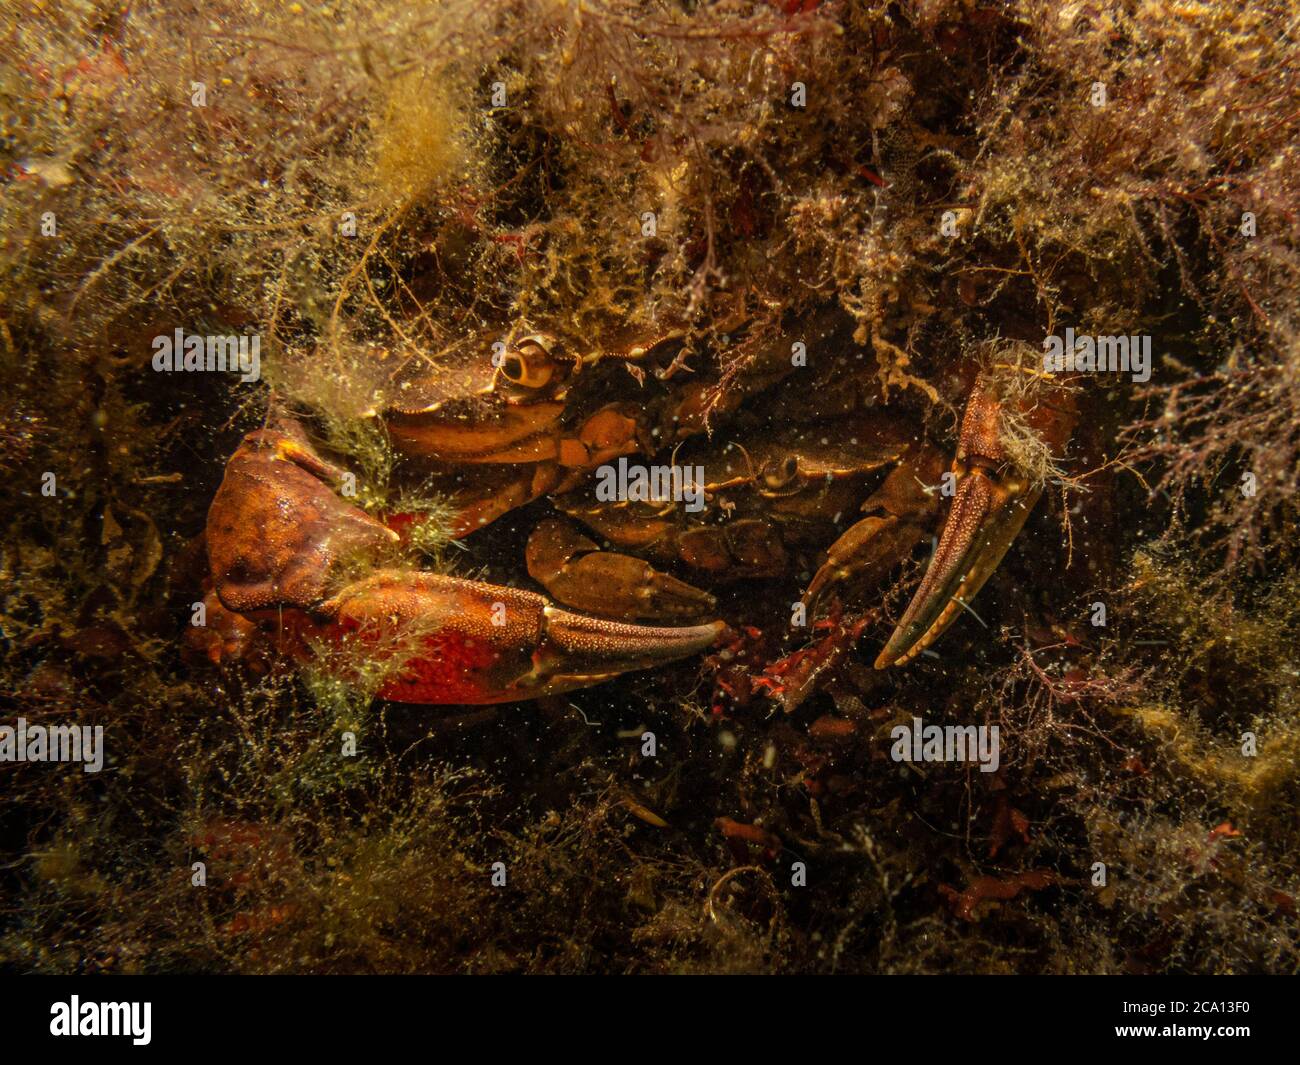 A closeup underwater picture of a crab almost pinching the camera with its huge claw. Picture from Oresund, Malmo in southern Sweden. Stock Photo